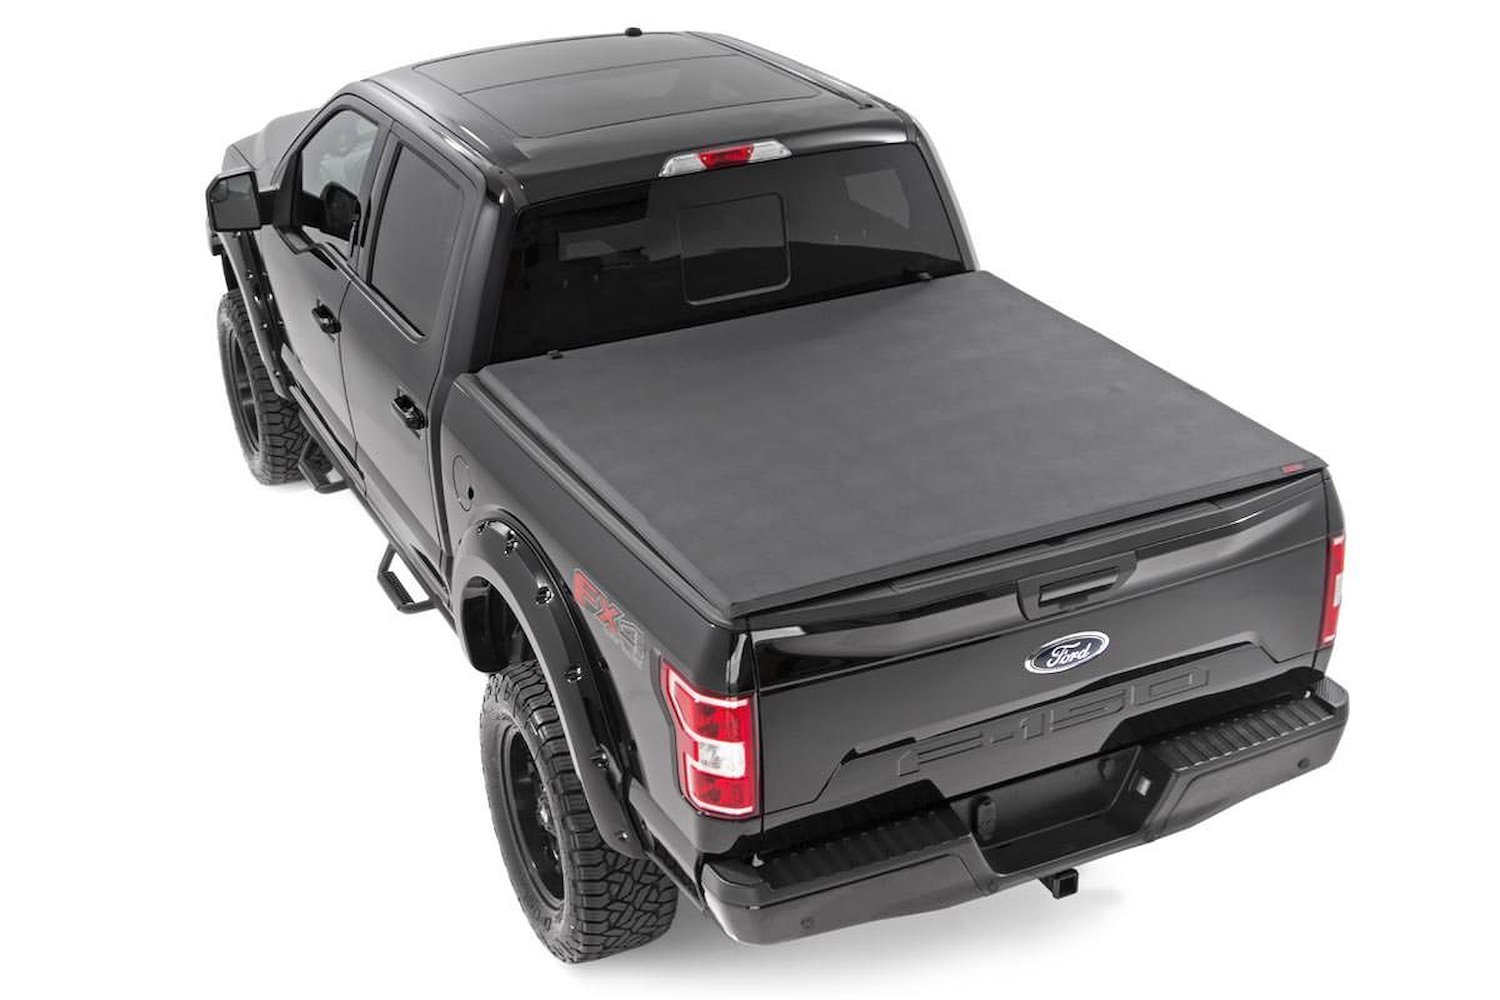 RC44521550 Ford Soft Tri-Fold Bed Cover (2021 F-150 - 5'5" Bed)